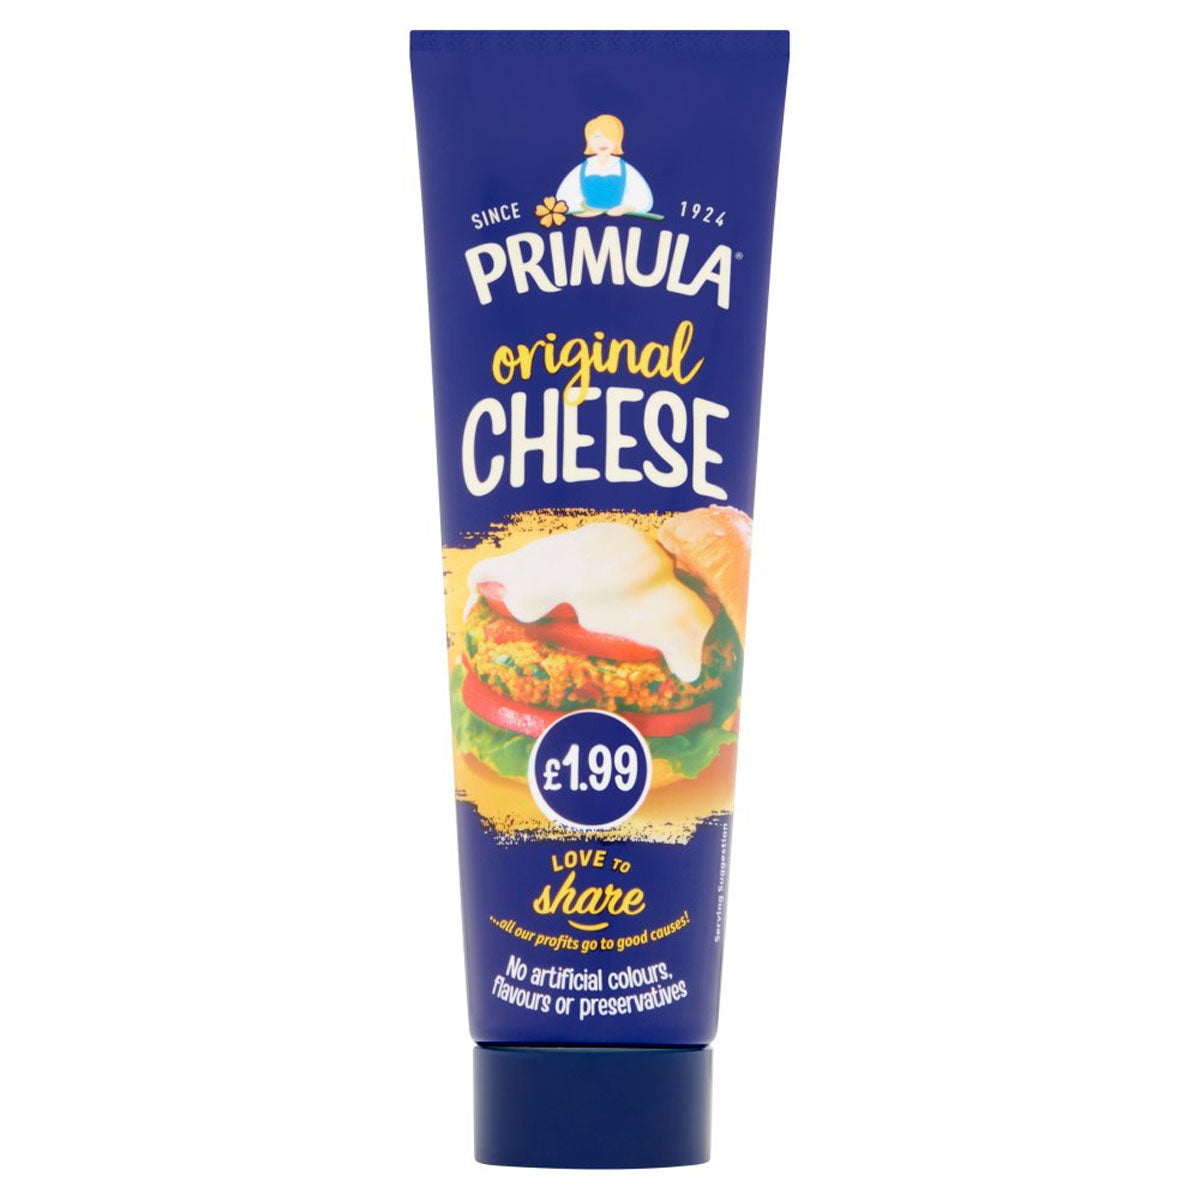 A tube of Primula - Original Cheese - 140g on a white background.